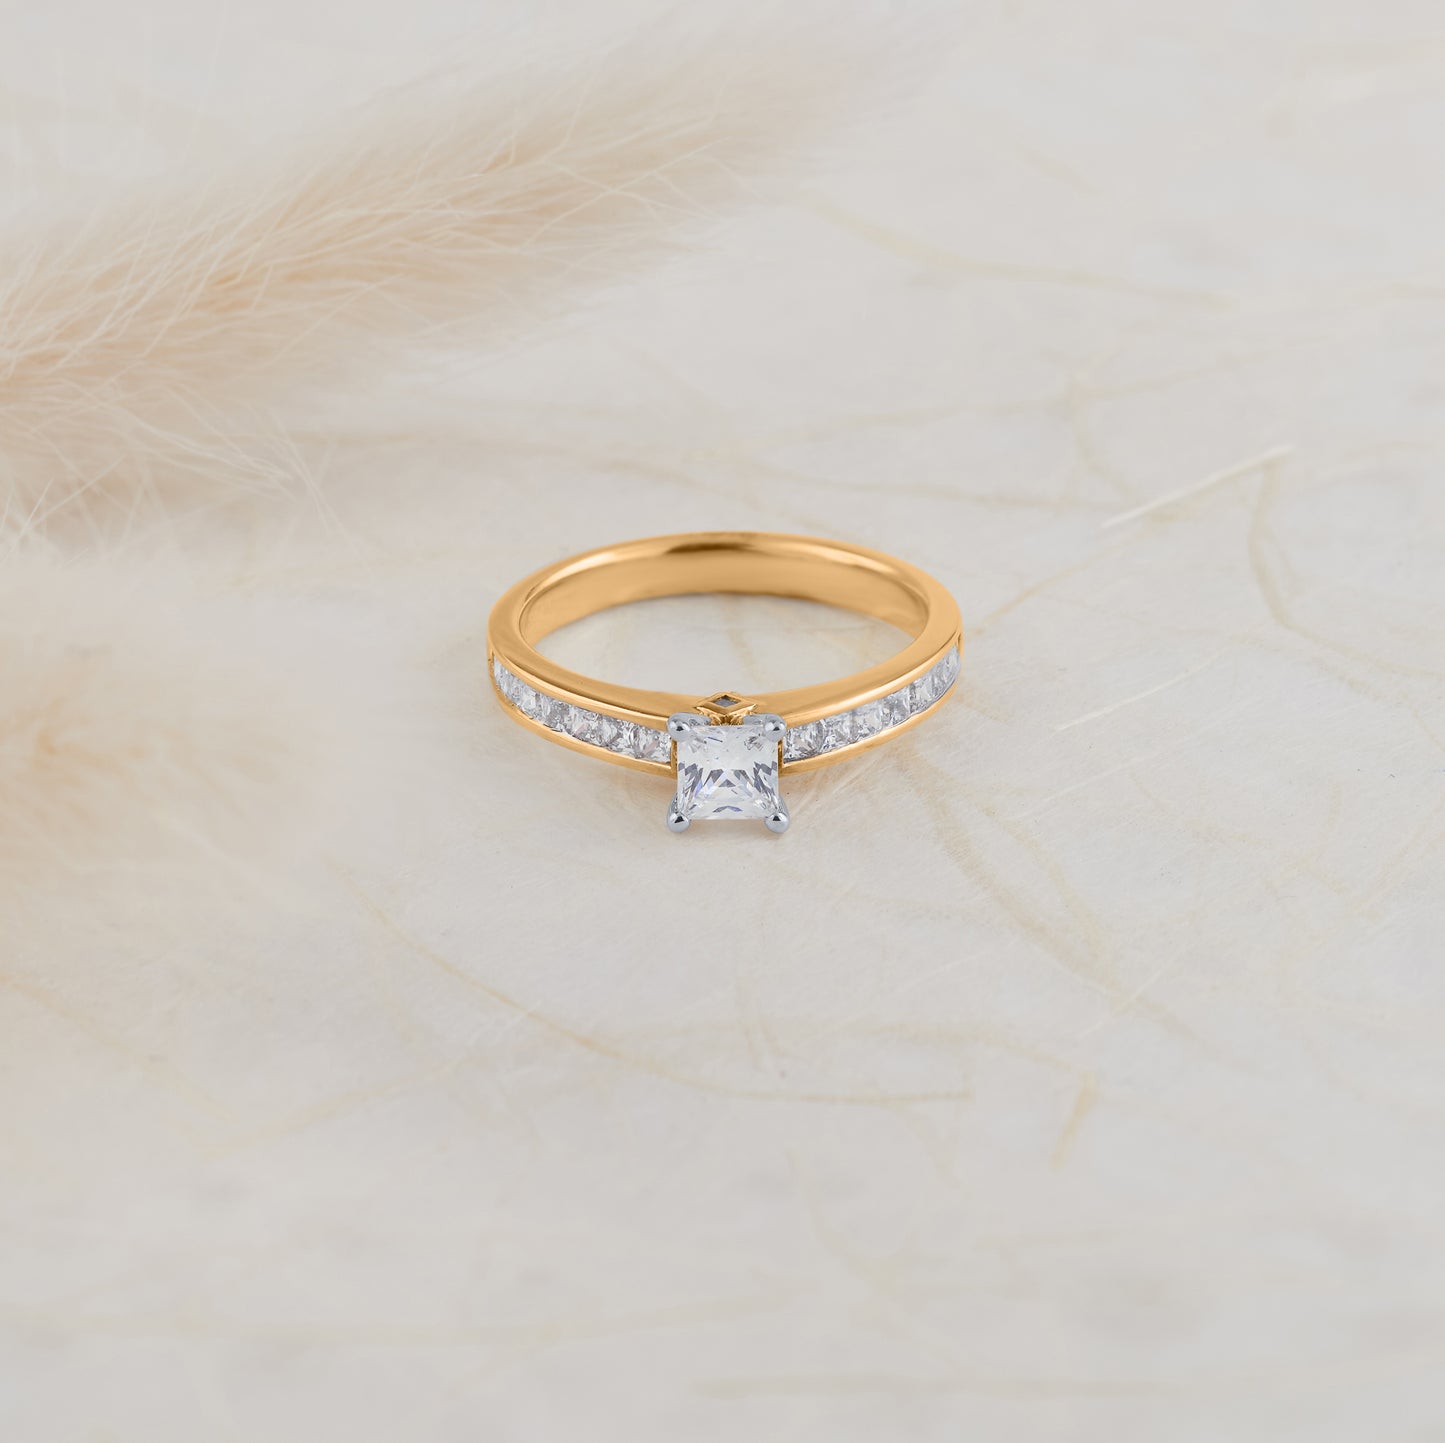 18K Yellow Gold and Platinum Princess Cut Diamond Solitaire with Shoulder Accents Engagement Ring 1.0tdw